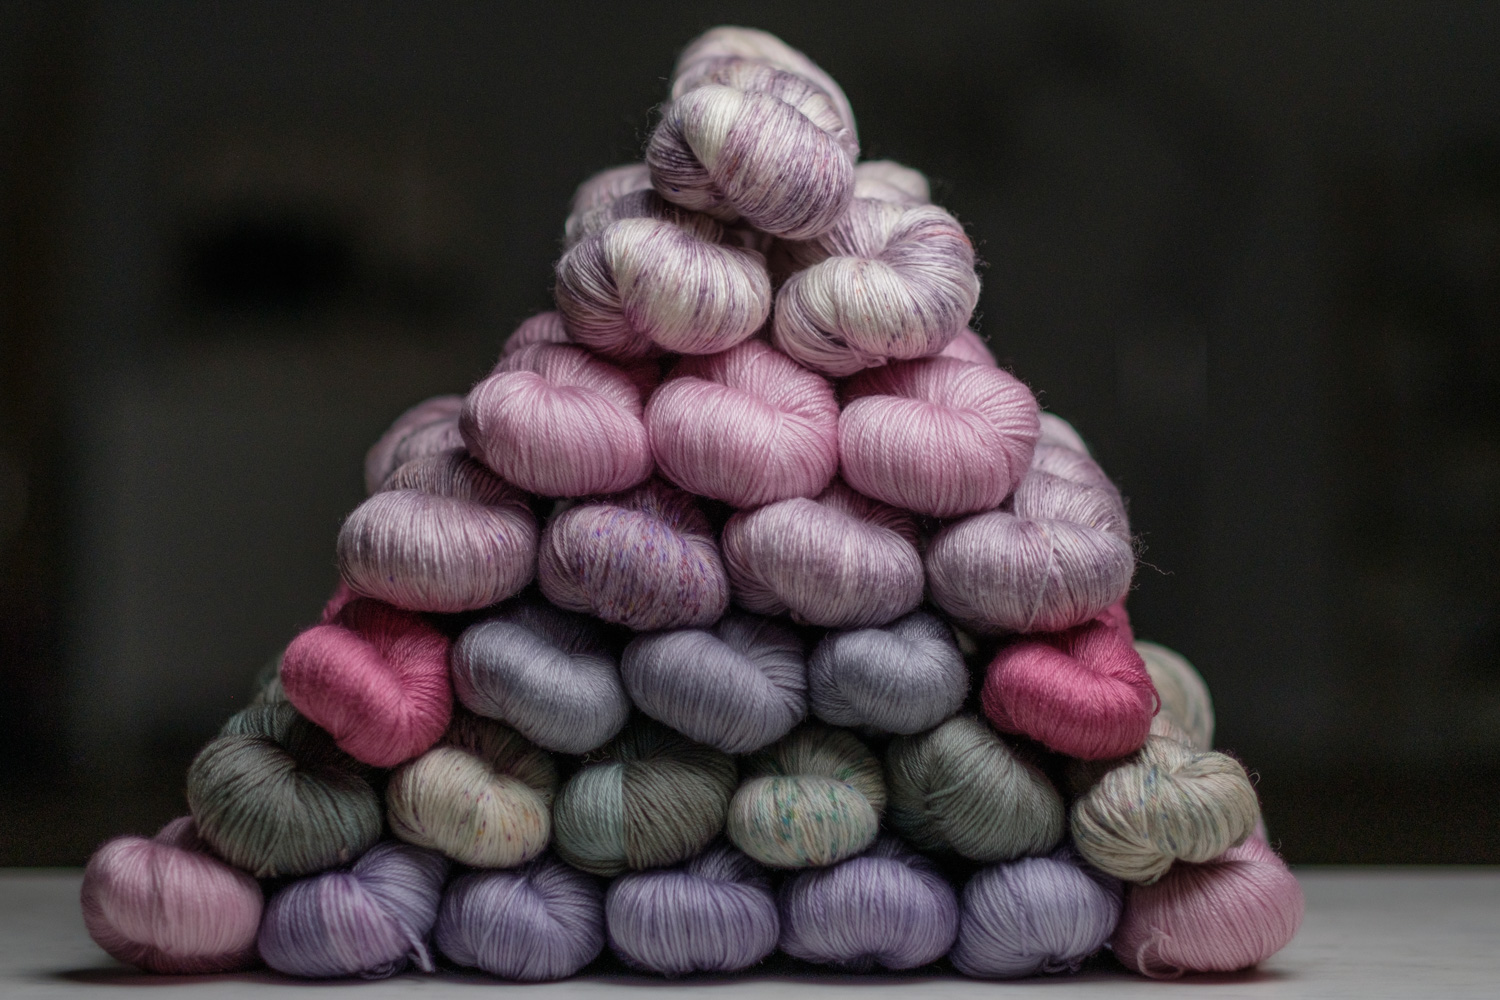 How to hand dye yarn at home with everyday materials - Dora Does